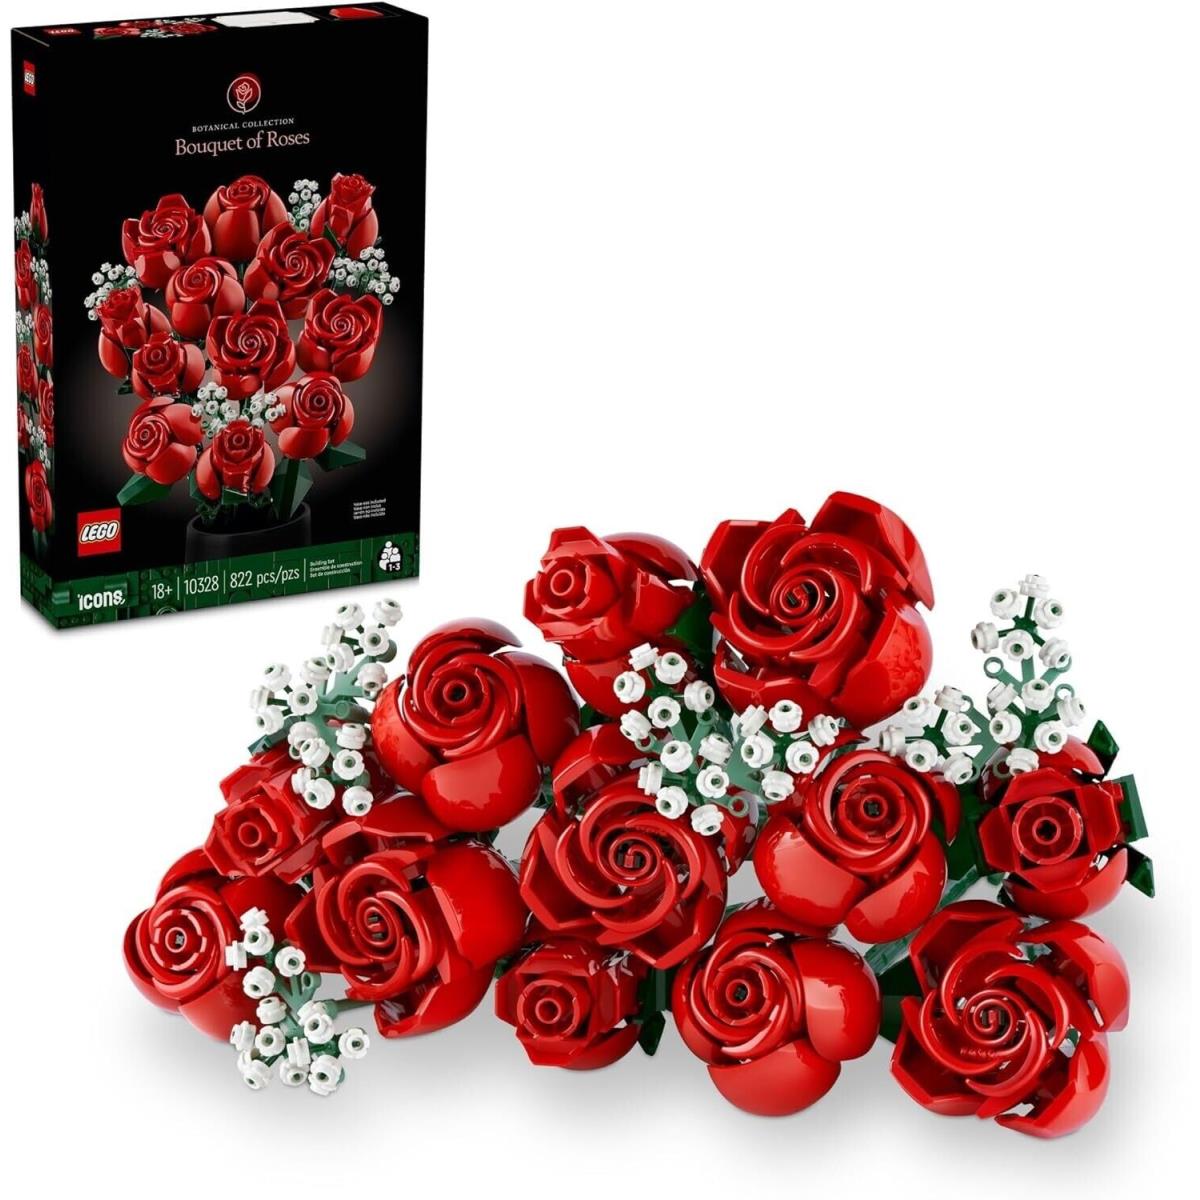 Lego Icons Bouquet of Roses For Anniversary and Valentine s Day Botanical 10328